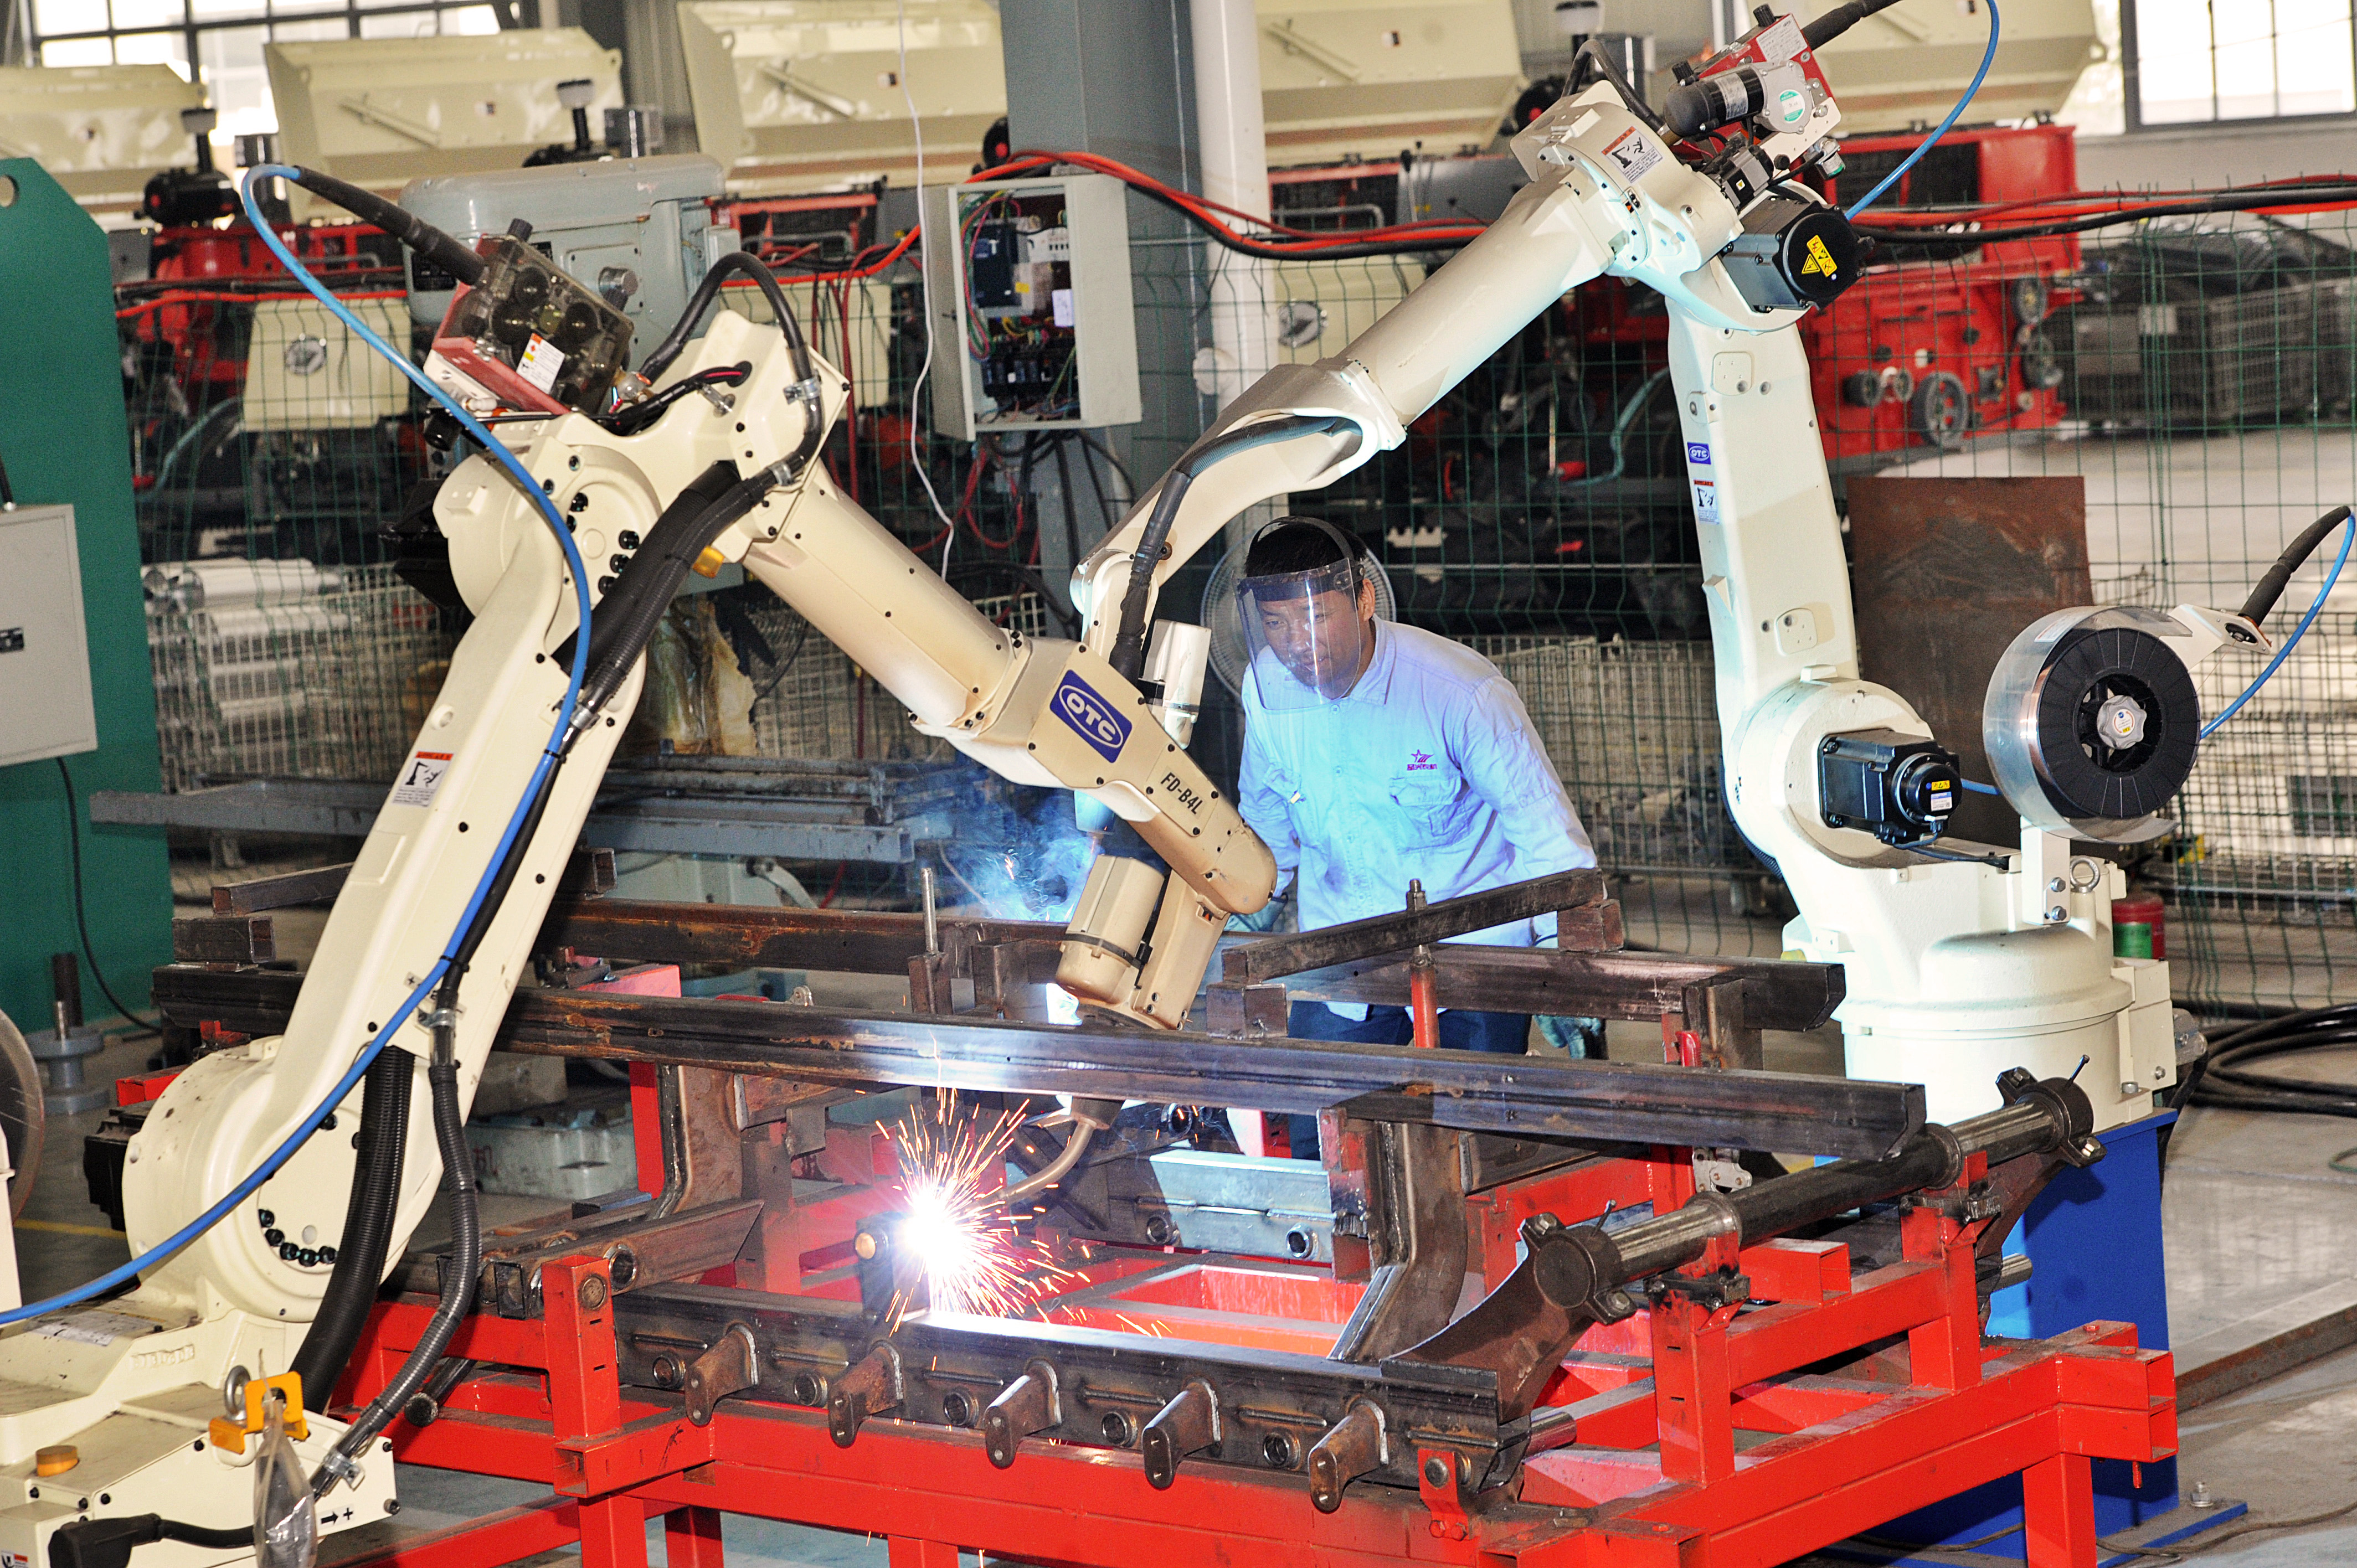 --FILE--A Chinese worker monitors robot arms welding components of reaping machines at the plant of Xingguang Agricultural Machinery Co., Ltd. in Huzhou city, east China's Zhejiang province, 21 October 2014.

China will have more robots operating in its production plants by 2017 than any other country as it cranks up automation of its car and electronics factories, the International Federation of Robotics (IFR) said on Thursday (5 February 2015). Already the biggest market in the $9.5 billion global robot trade, or $29 billion including associated software, peripherals and systems engineering, China lags far behind its more industrialized peers in terms of robot density. China has just 30 robots per 10,000 workers employed in manufacturing industries, compared with 437 in South Korea, 323 in Japan, 282 in Germany and 152 in the United States. But a race by carmakers to build plants in China along with wage inflation that has eroded the competitiveness of Chinese labour will push the operational stock of industrial robots to more than double to 428,000 by 2017, the IFR estimates.